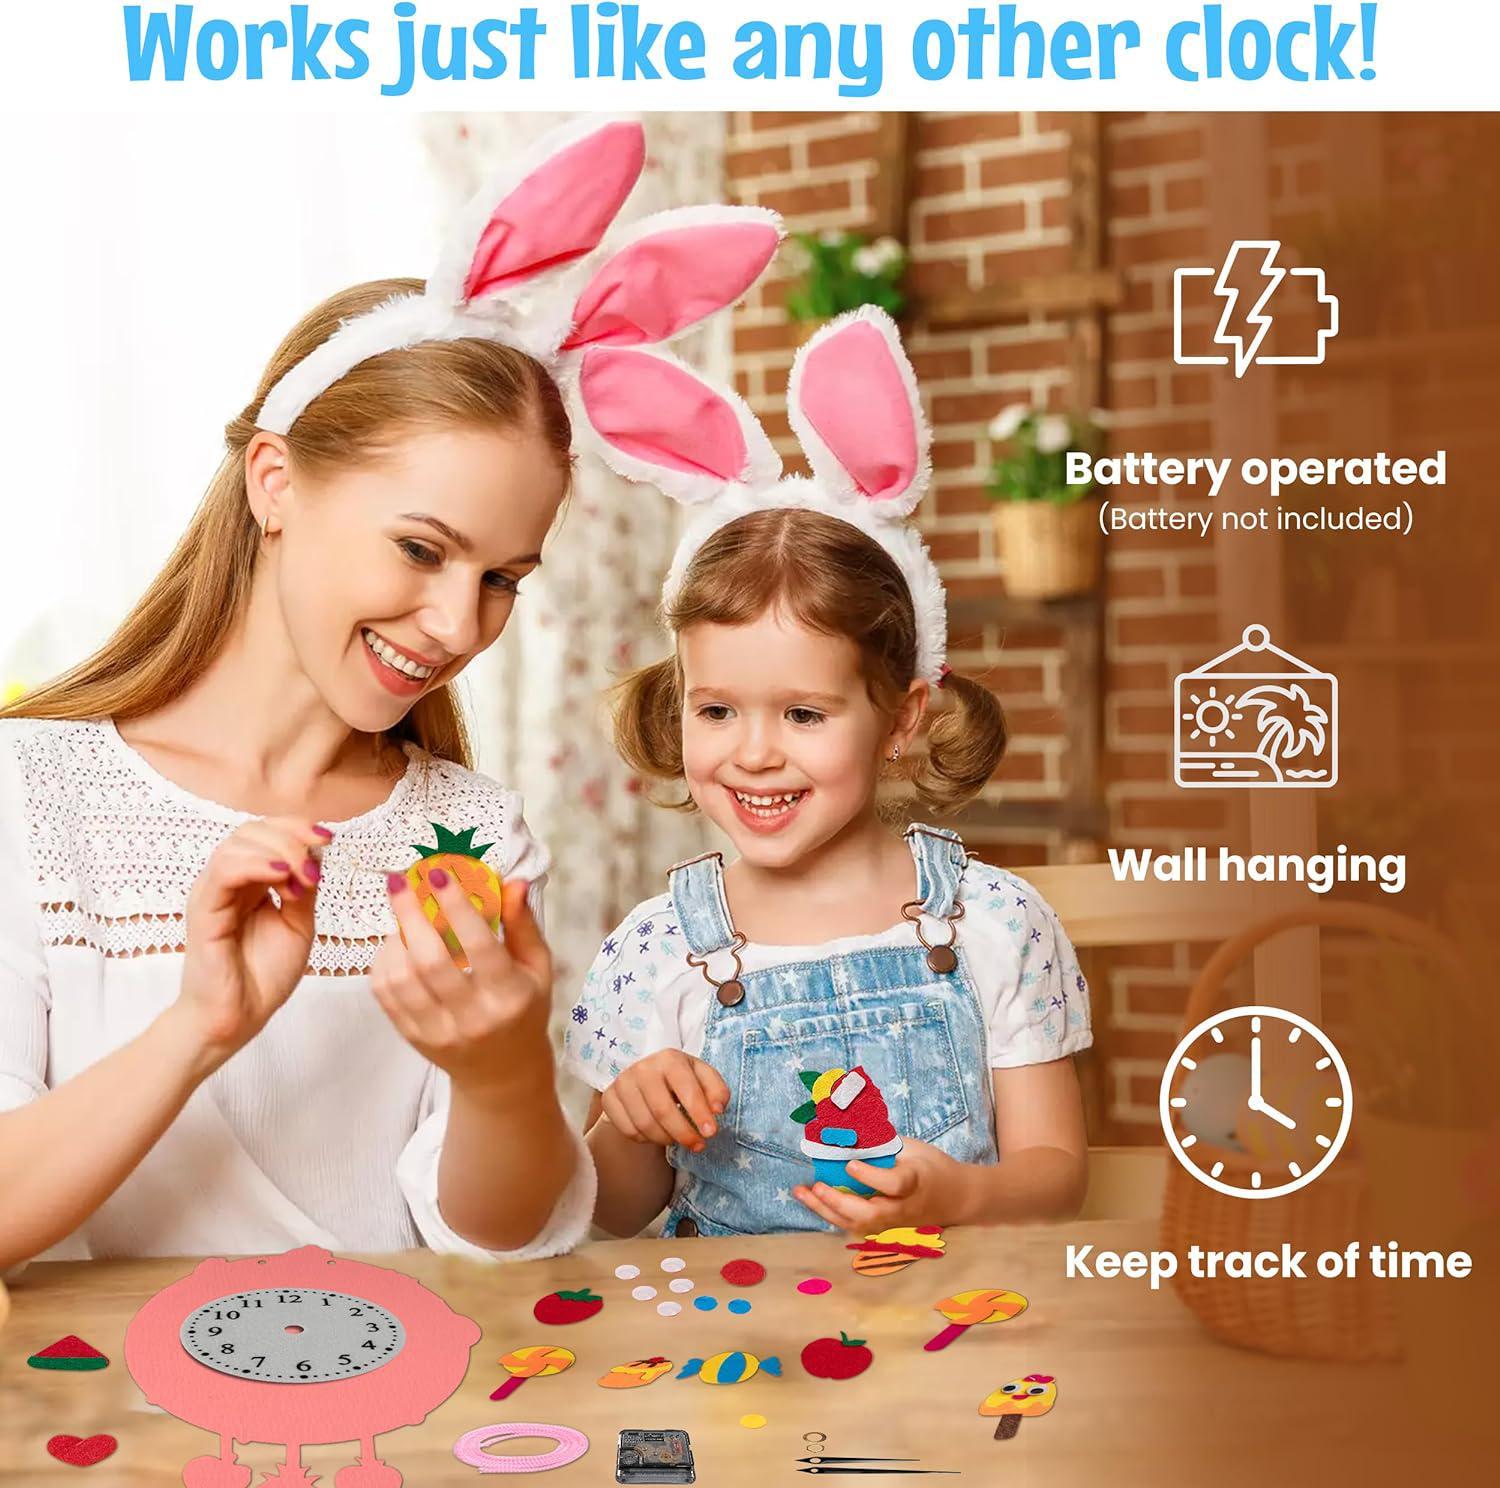  goldentime Kids Wall Clock for Do It Yourself